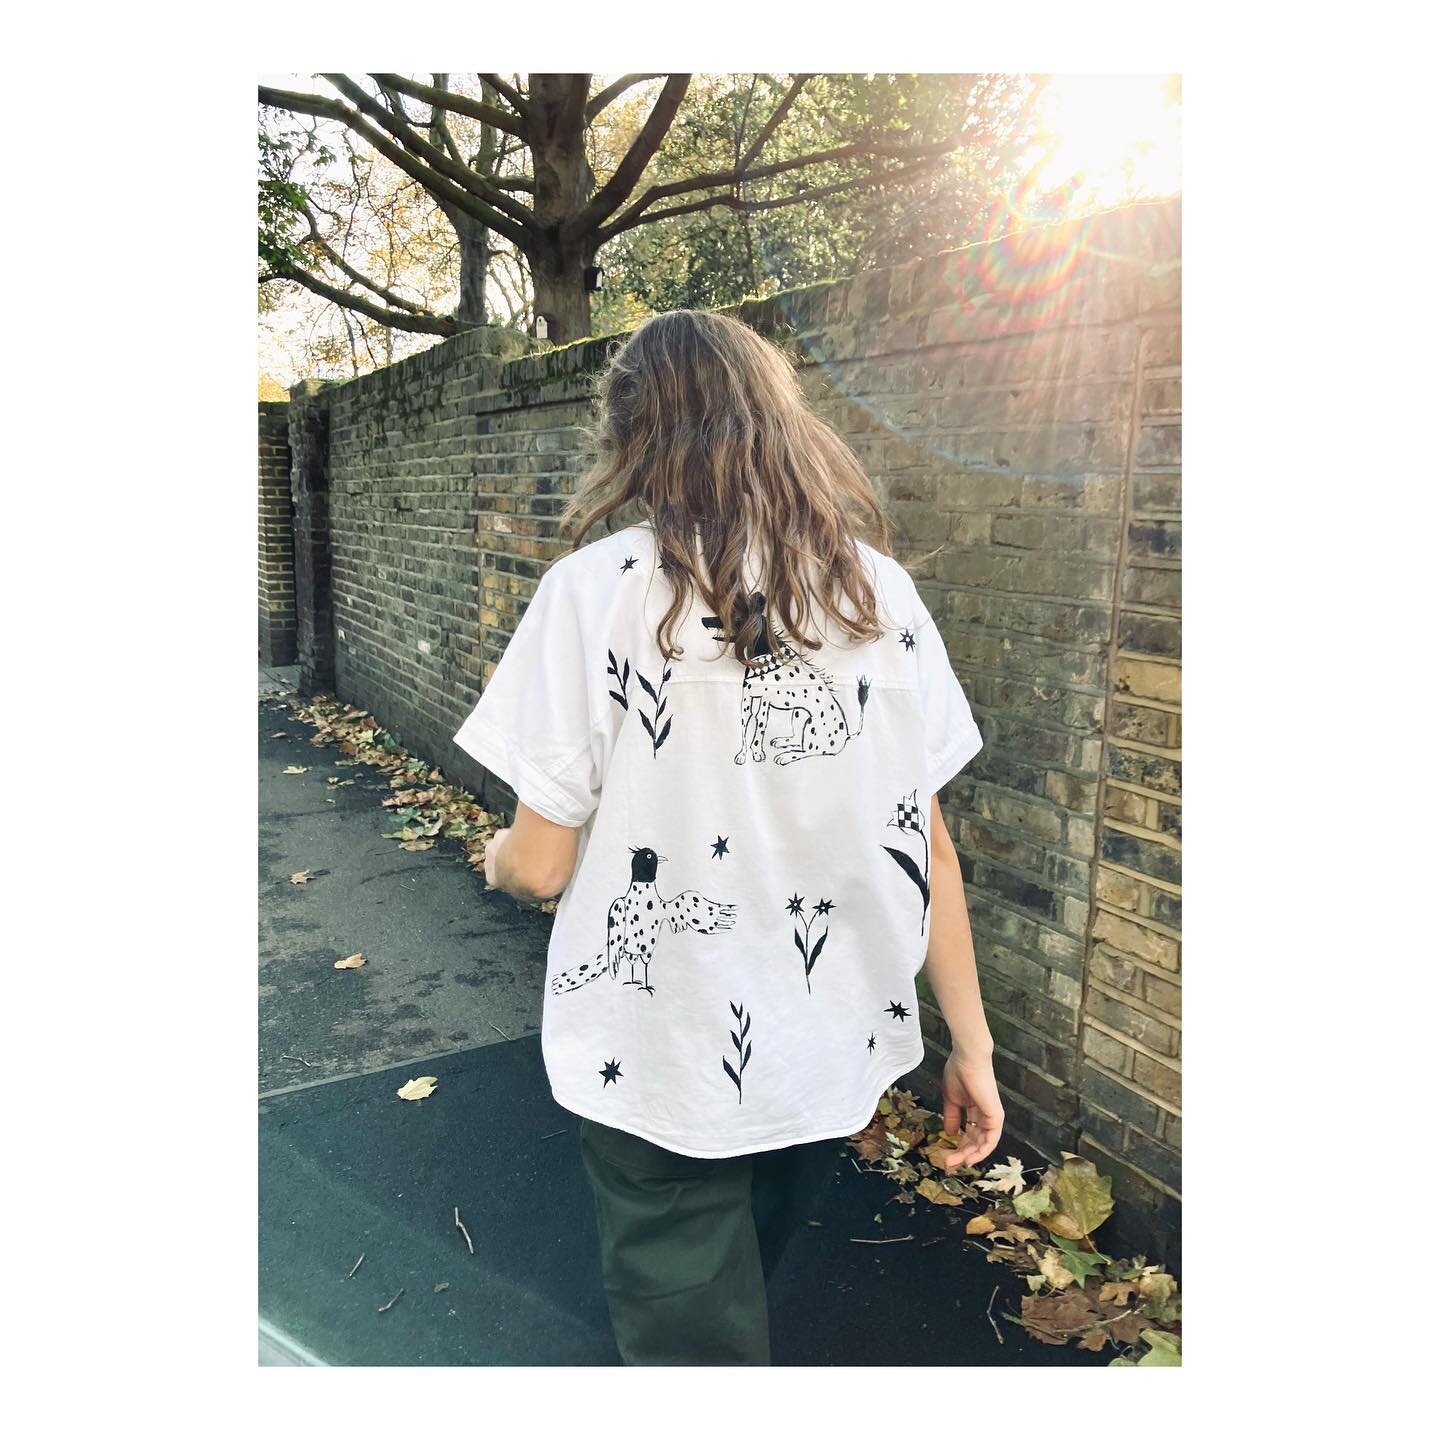 On sale soon,  my mini collection in collaboration with @stae.store. A short series of unique hand painted designs on preloved on Jenna&rsquo;s great pieces. 

1st&amp;2nd of December in Shoreditch Hall.  Save the date! The pieces will be on sale alo